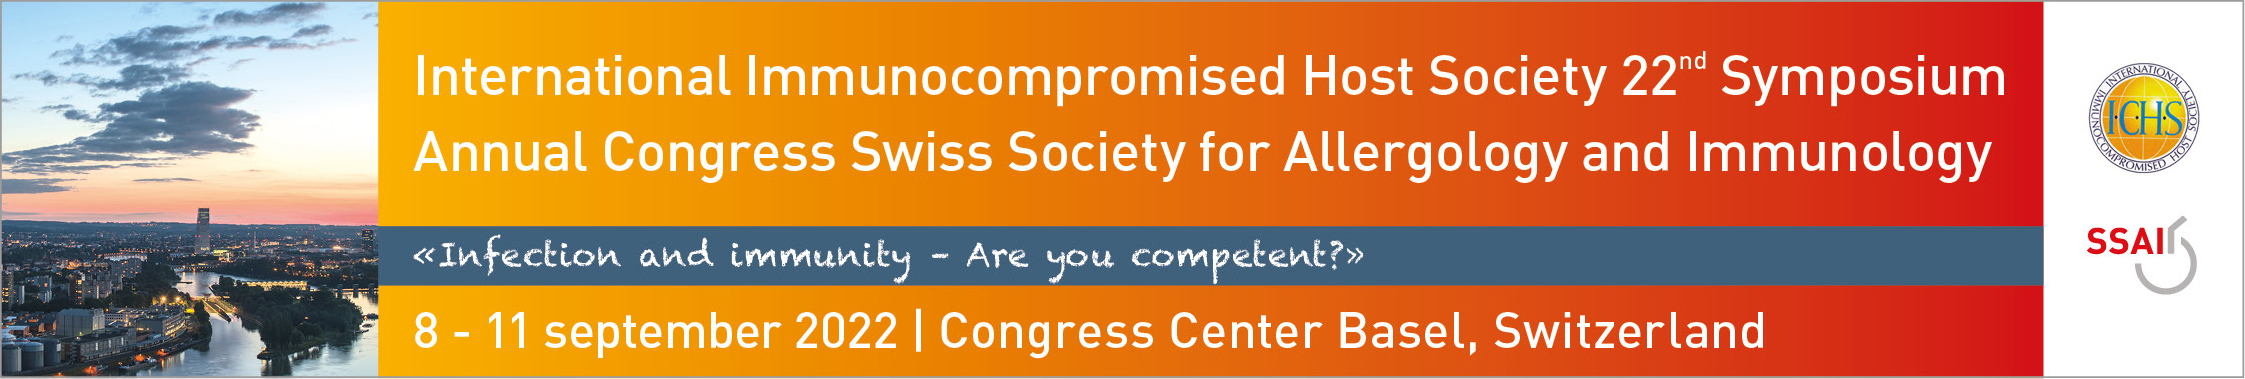 International Immunocompromised Host Society 22nd Symposium / Annual Congress Swiss Society for Allergology and Immunology